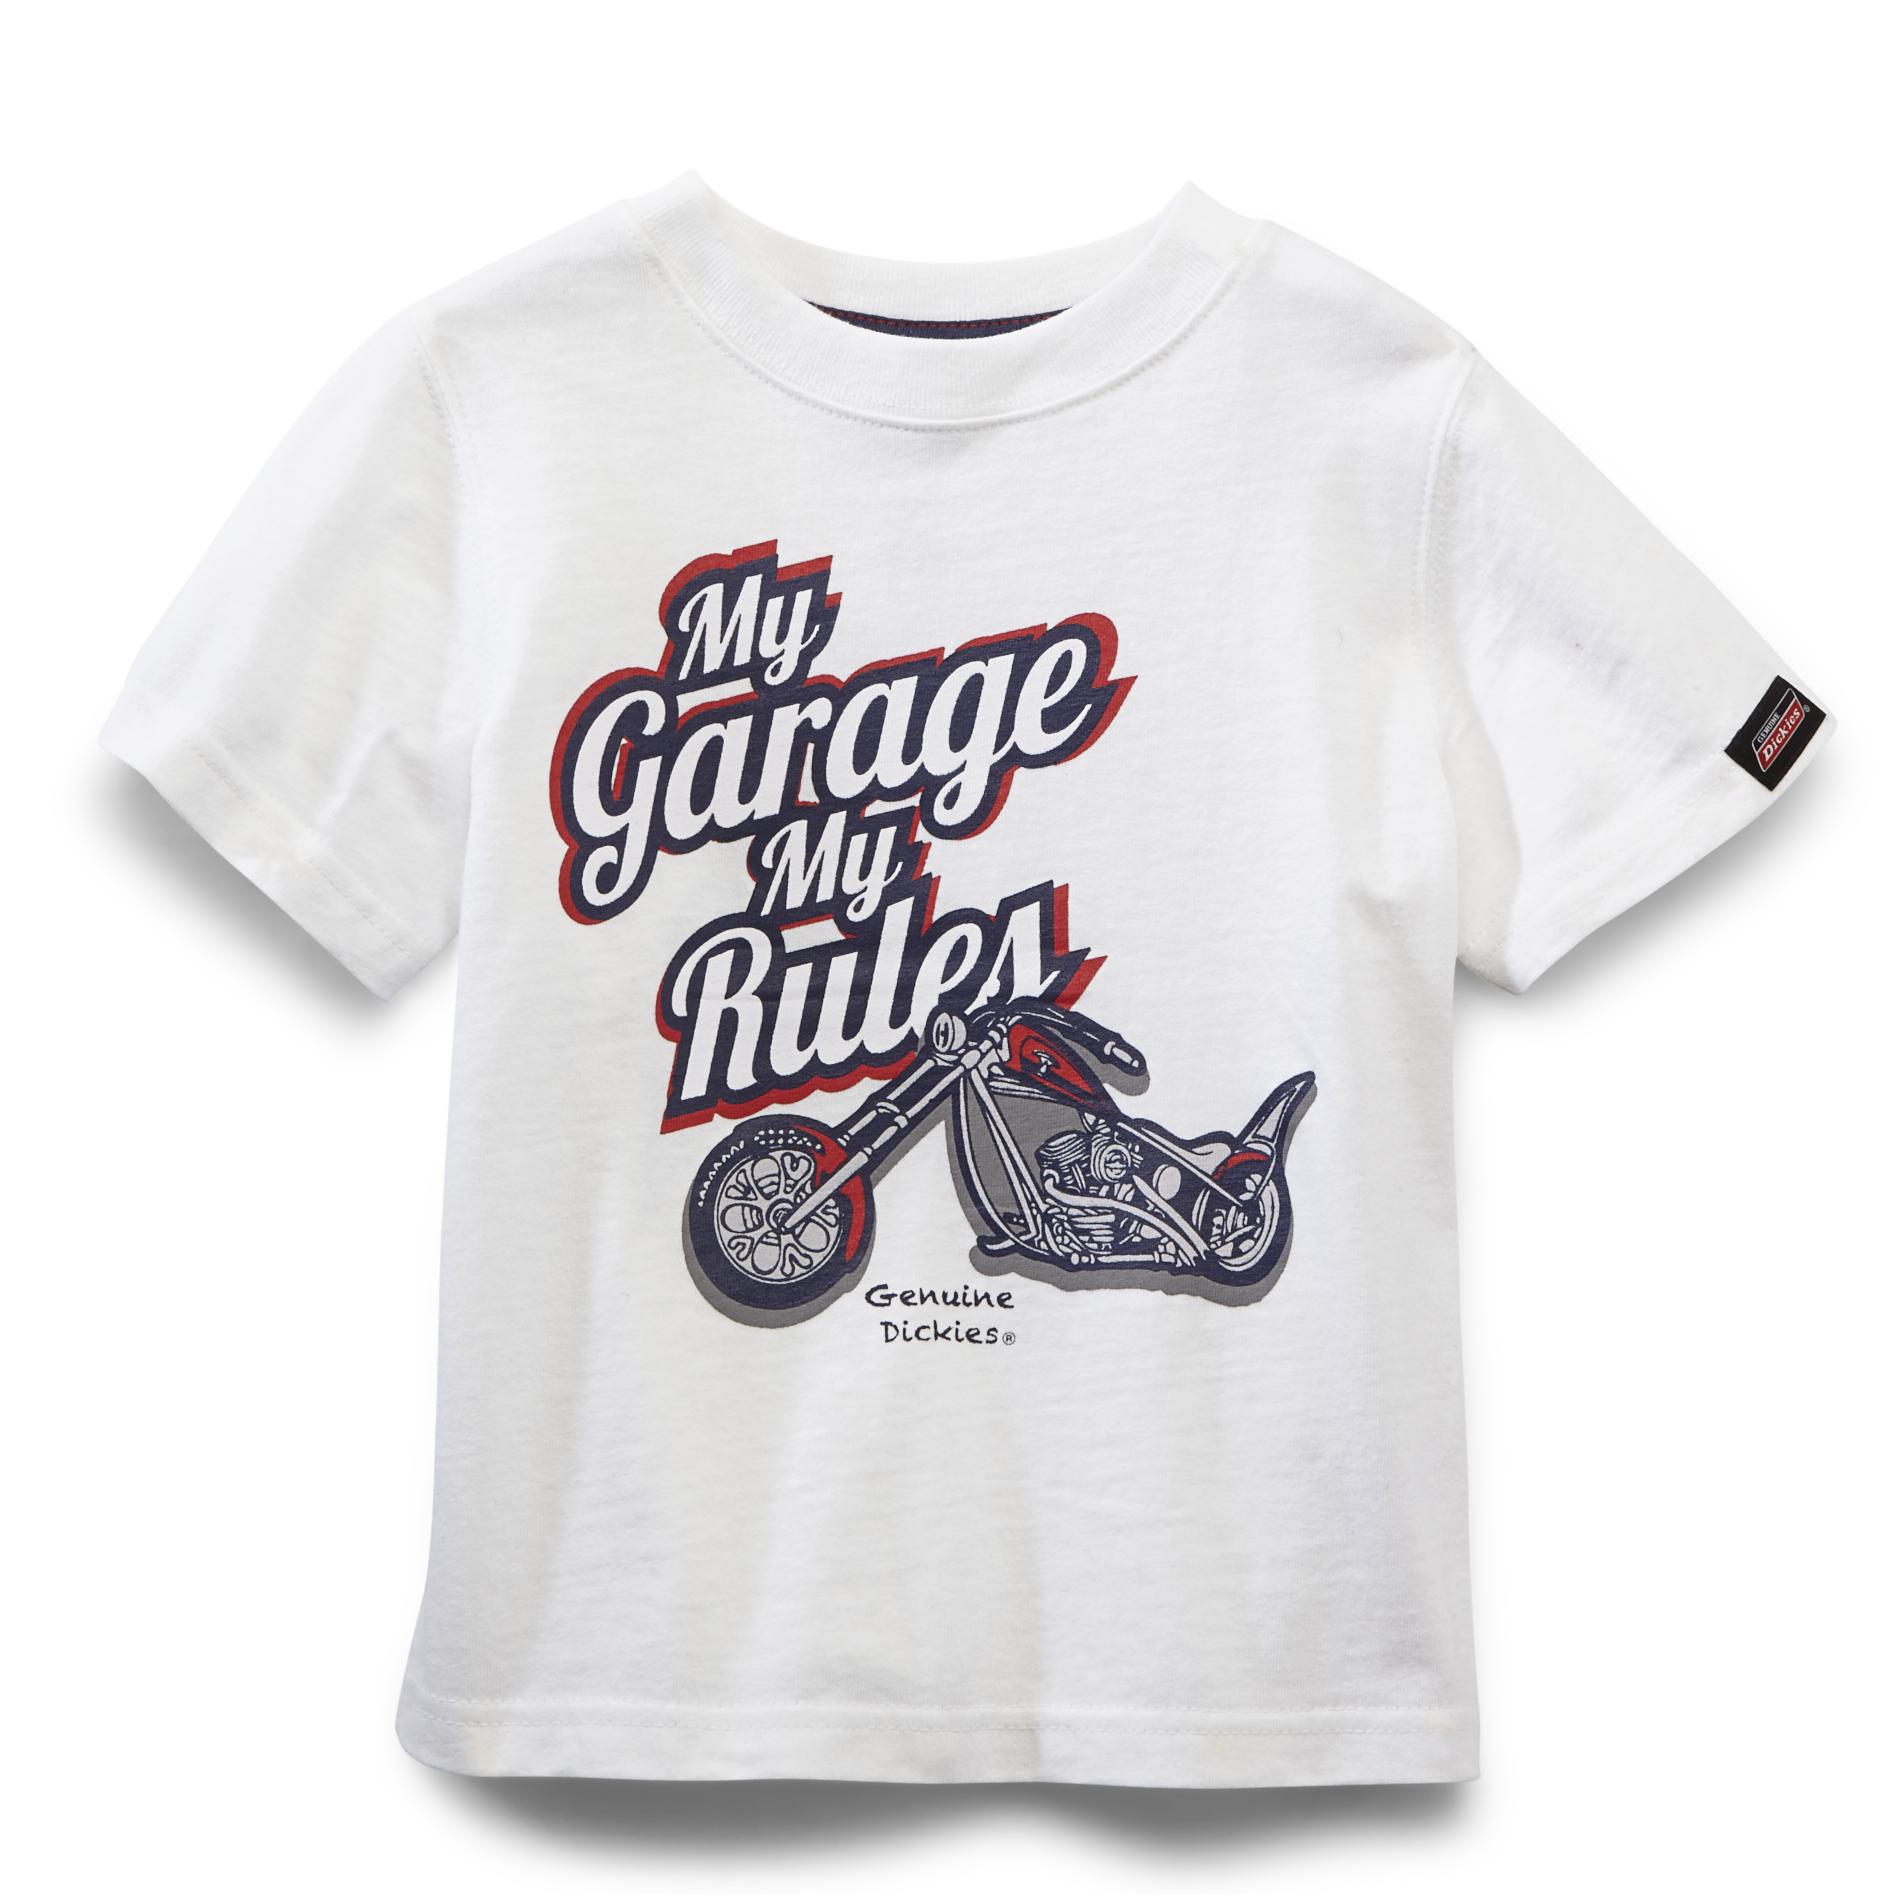 Dickies Toddler Boy's Short-Sleeve Graphic T-Shirt - Motorcycle